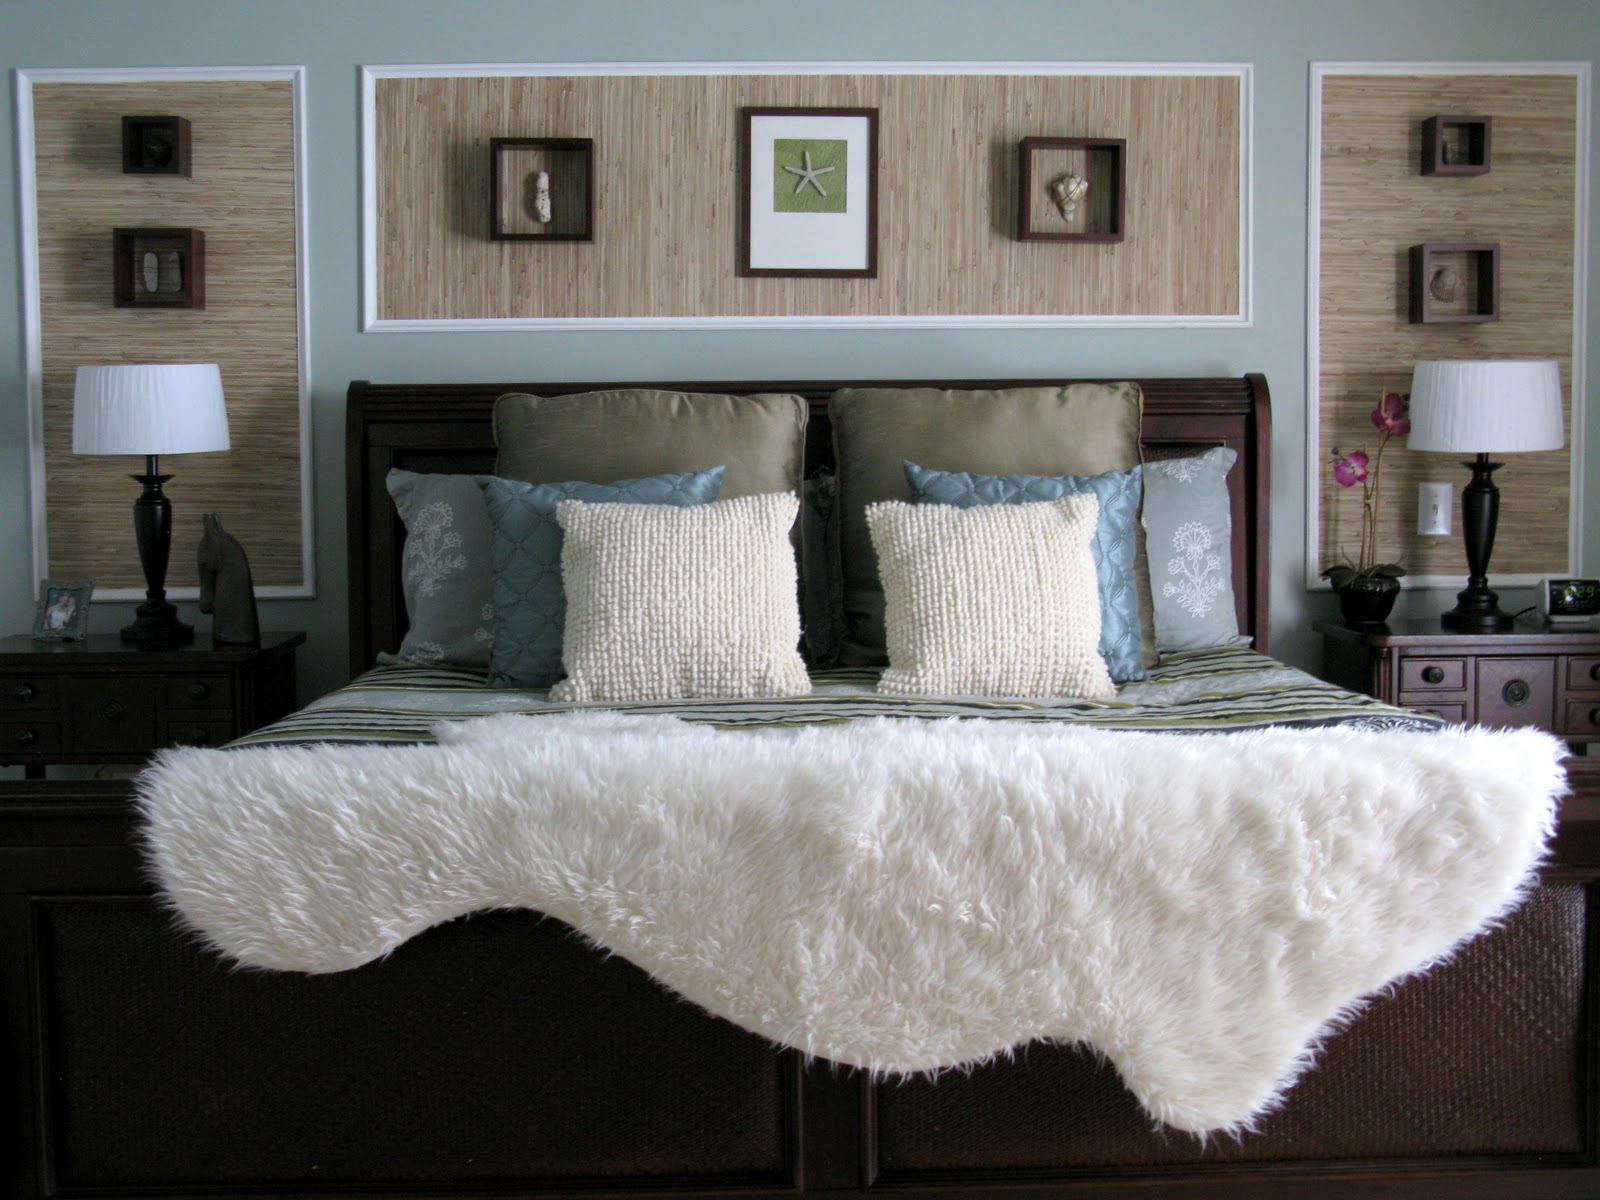 LoveYourRoom: Voted One of the Top Bedrooms by Houzz 